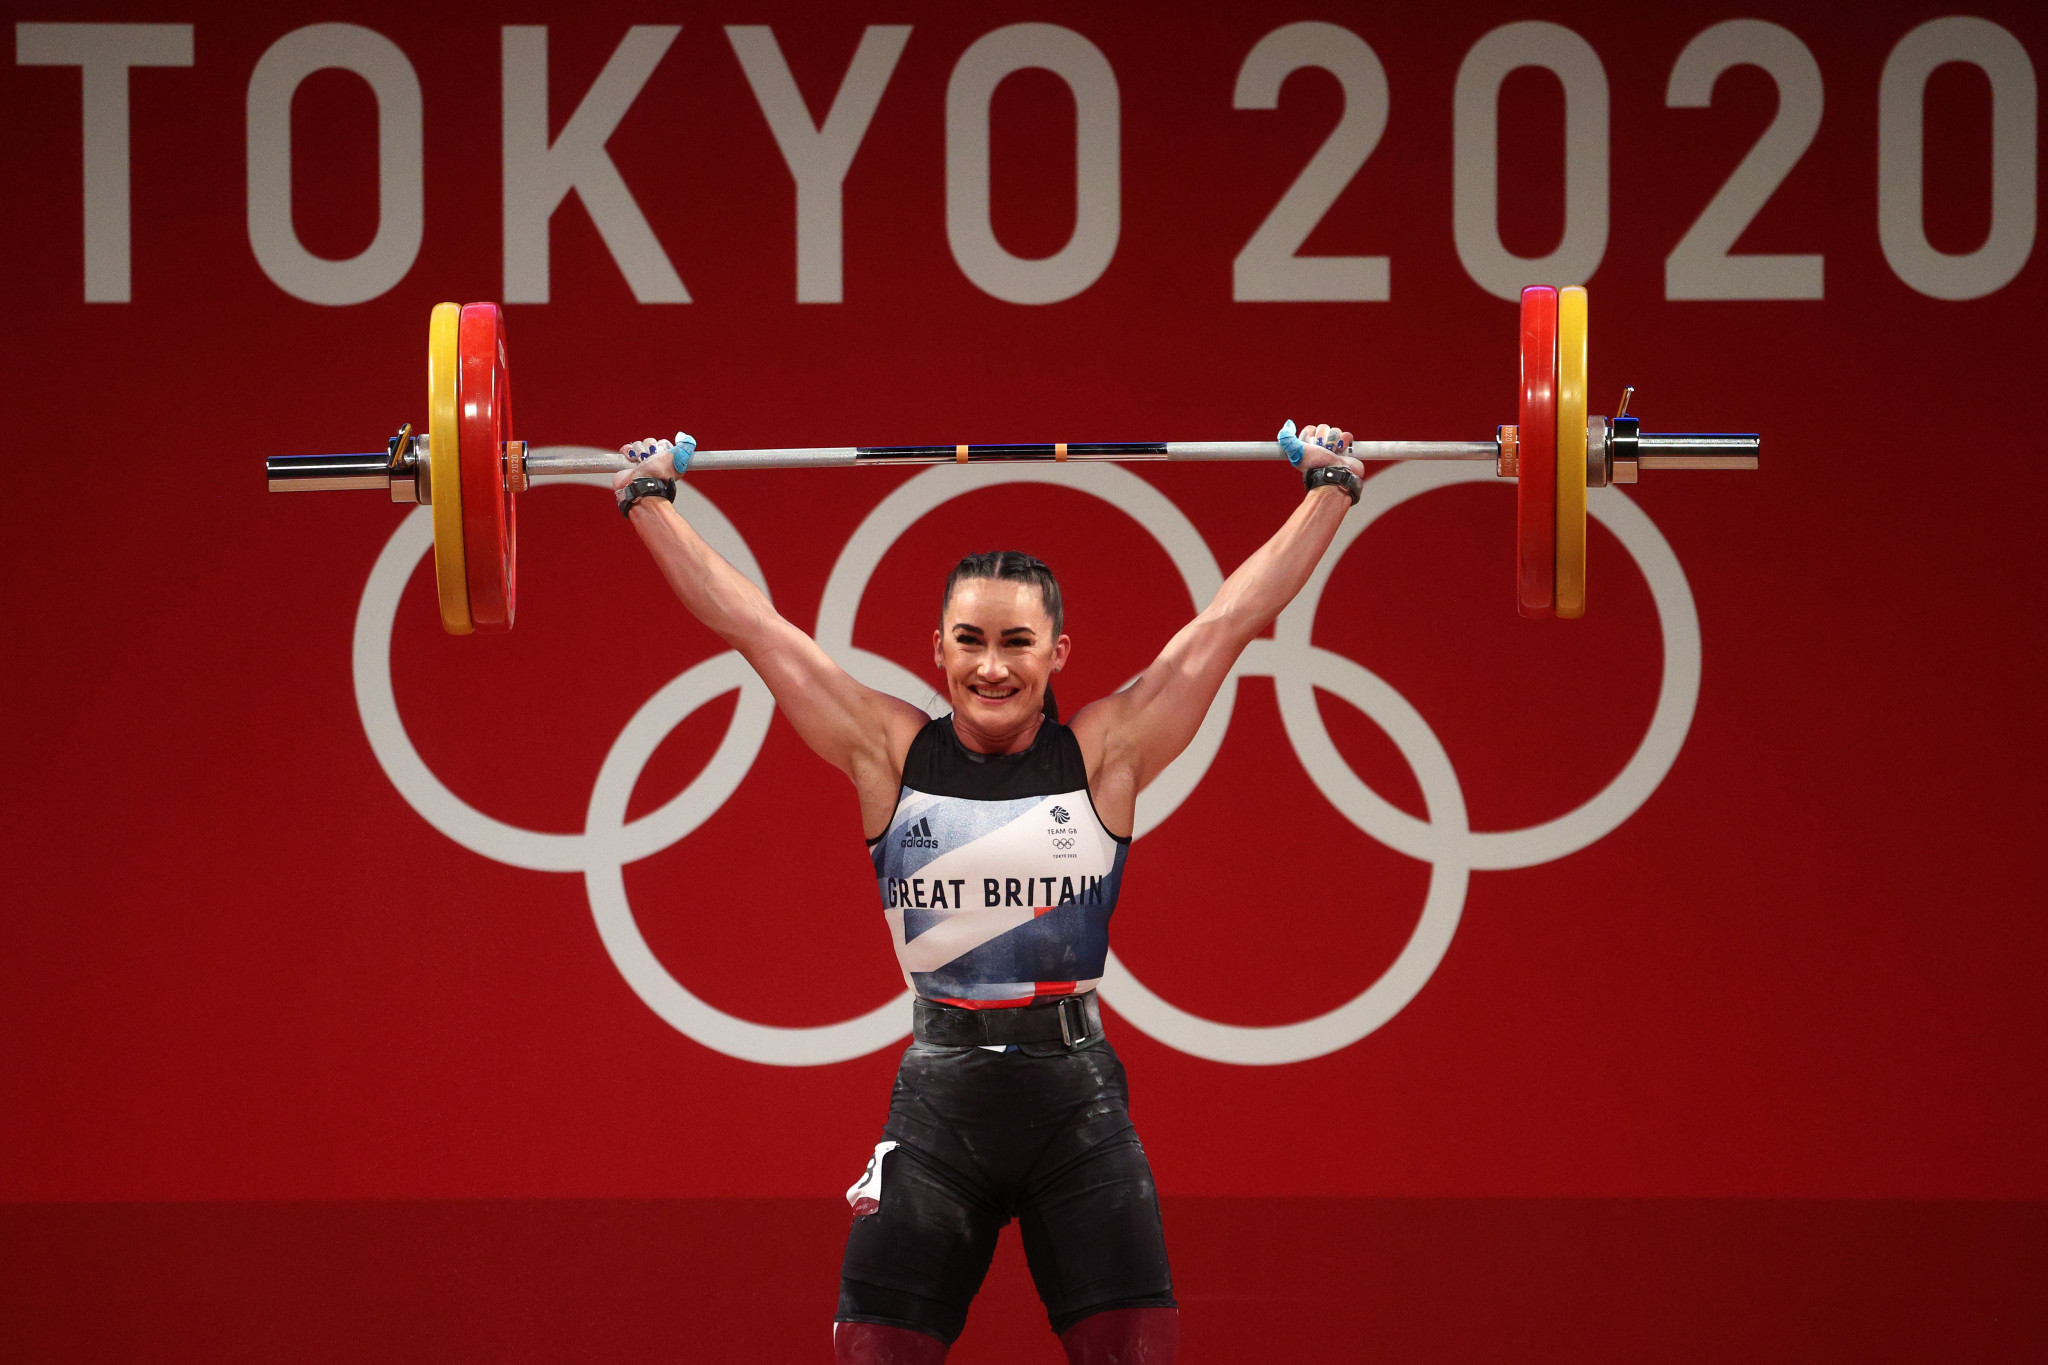 IWF Athletes' Commission to discuss "bringing down the walls" to open up weightlifting